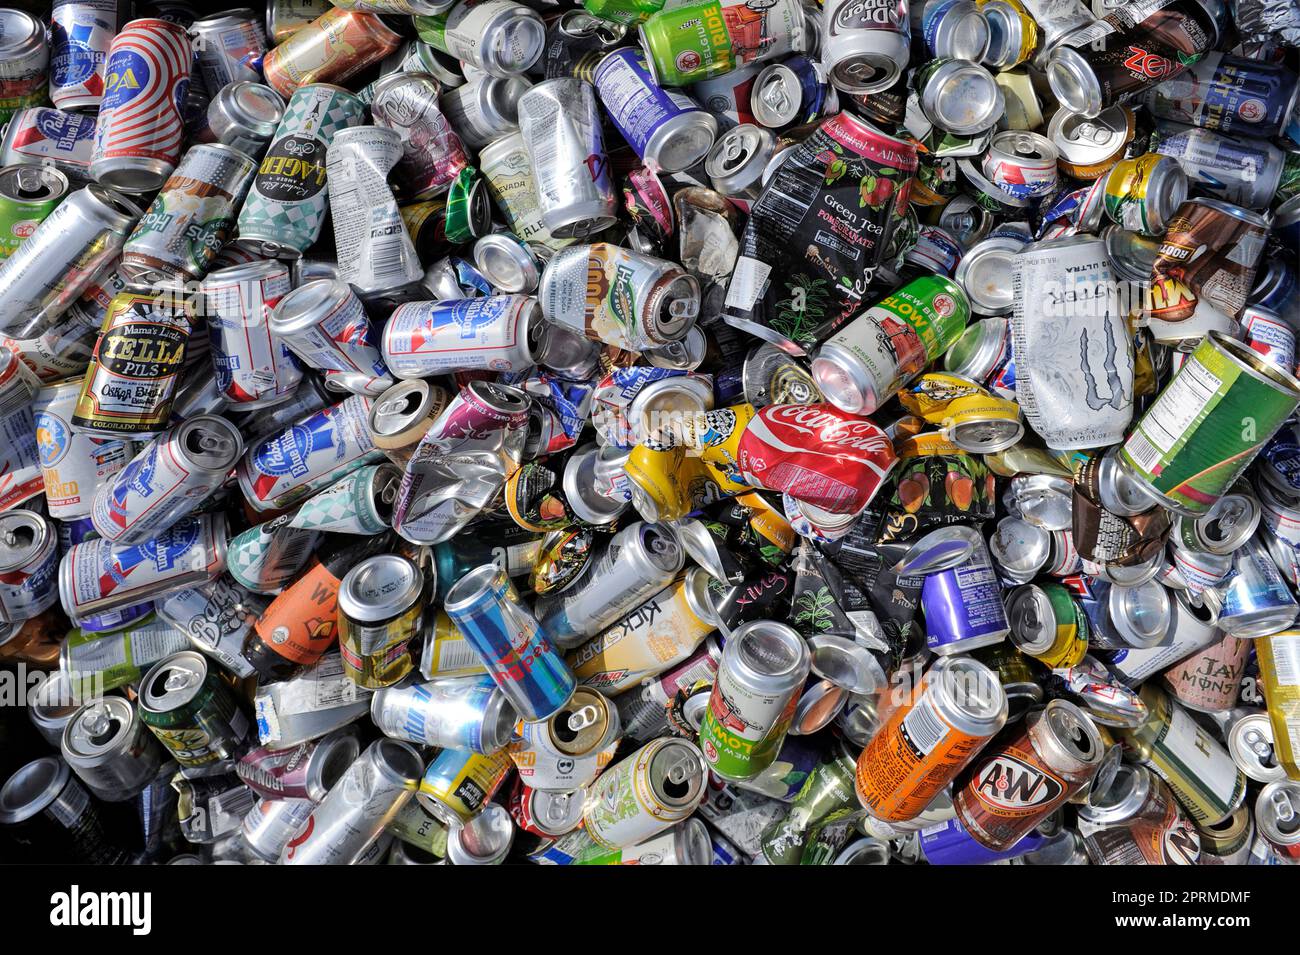 MOAB, Utah, USA,June 4,2015: Empty beverage cans for recycling in a roadside container. Stock Photo